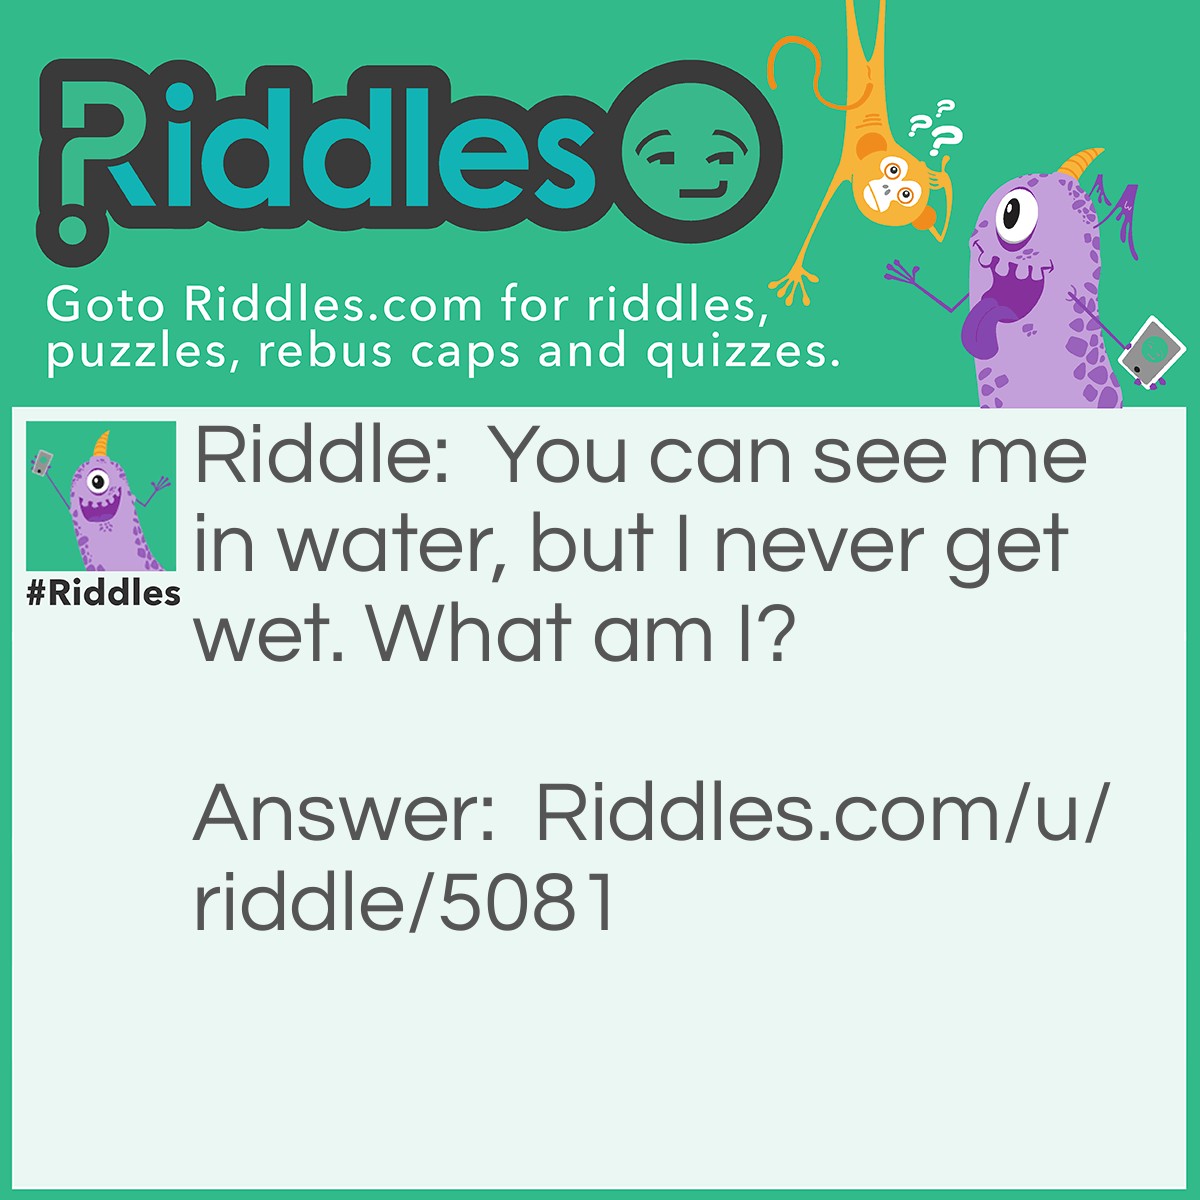 Riddle: You can see me in water, but I never get wet. What am I? Answer: Your reflection.